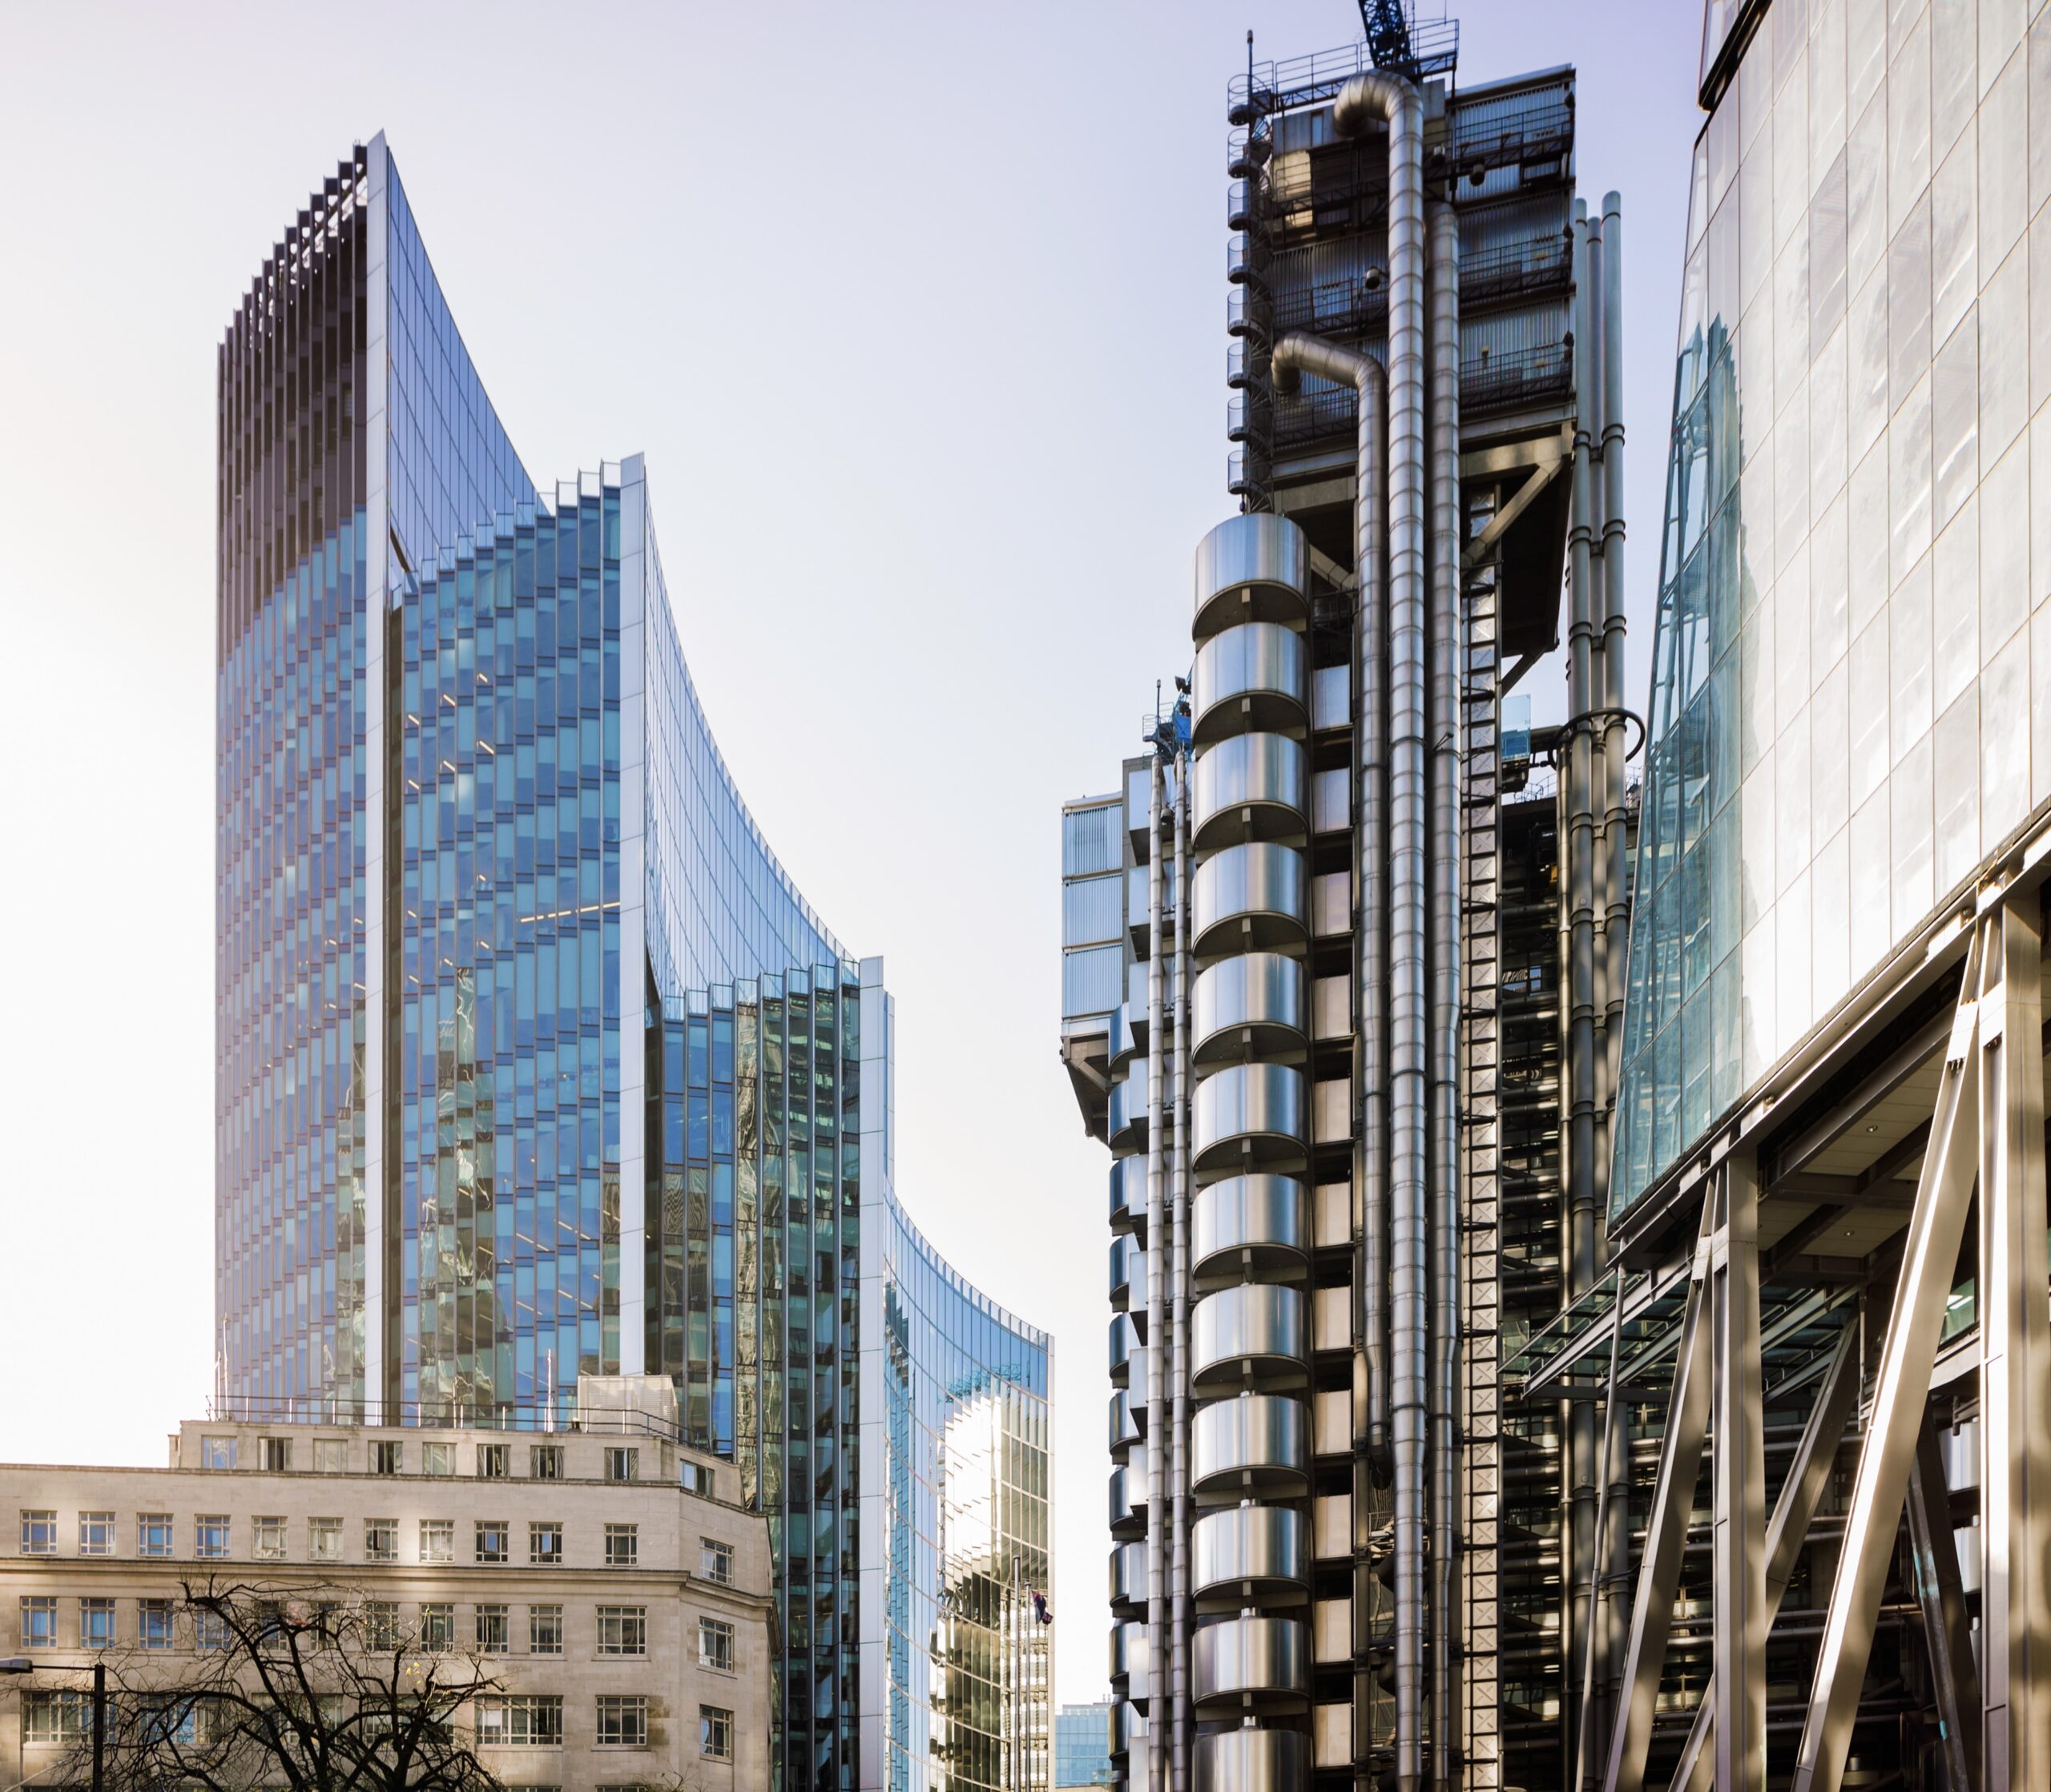 The LLoyds and Willis buildings in London.